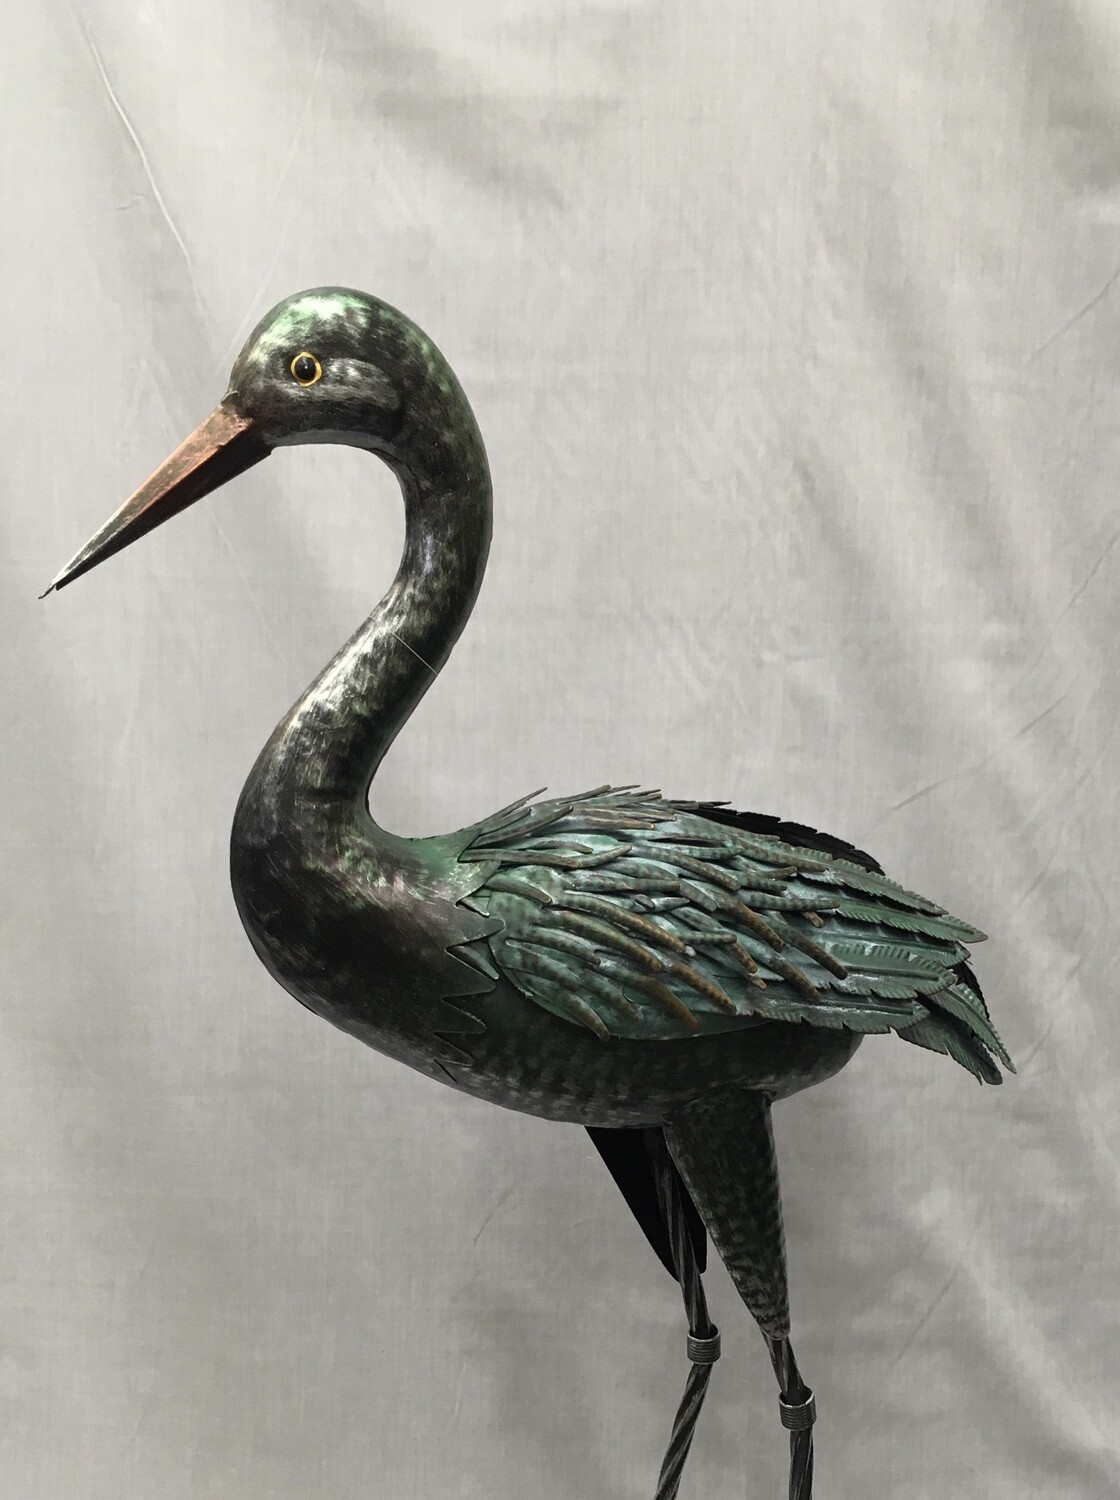 Antiqued Green Standing Heron - 36" tall - Metal Garden Decor - Includes stake peg